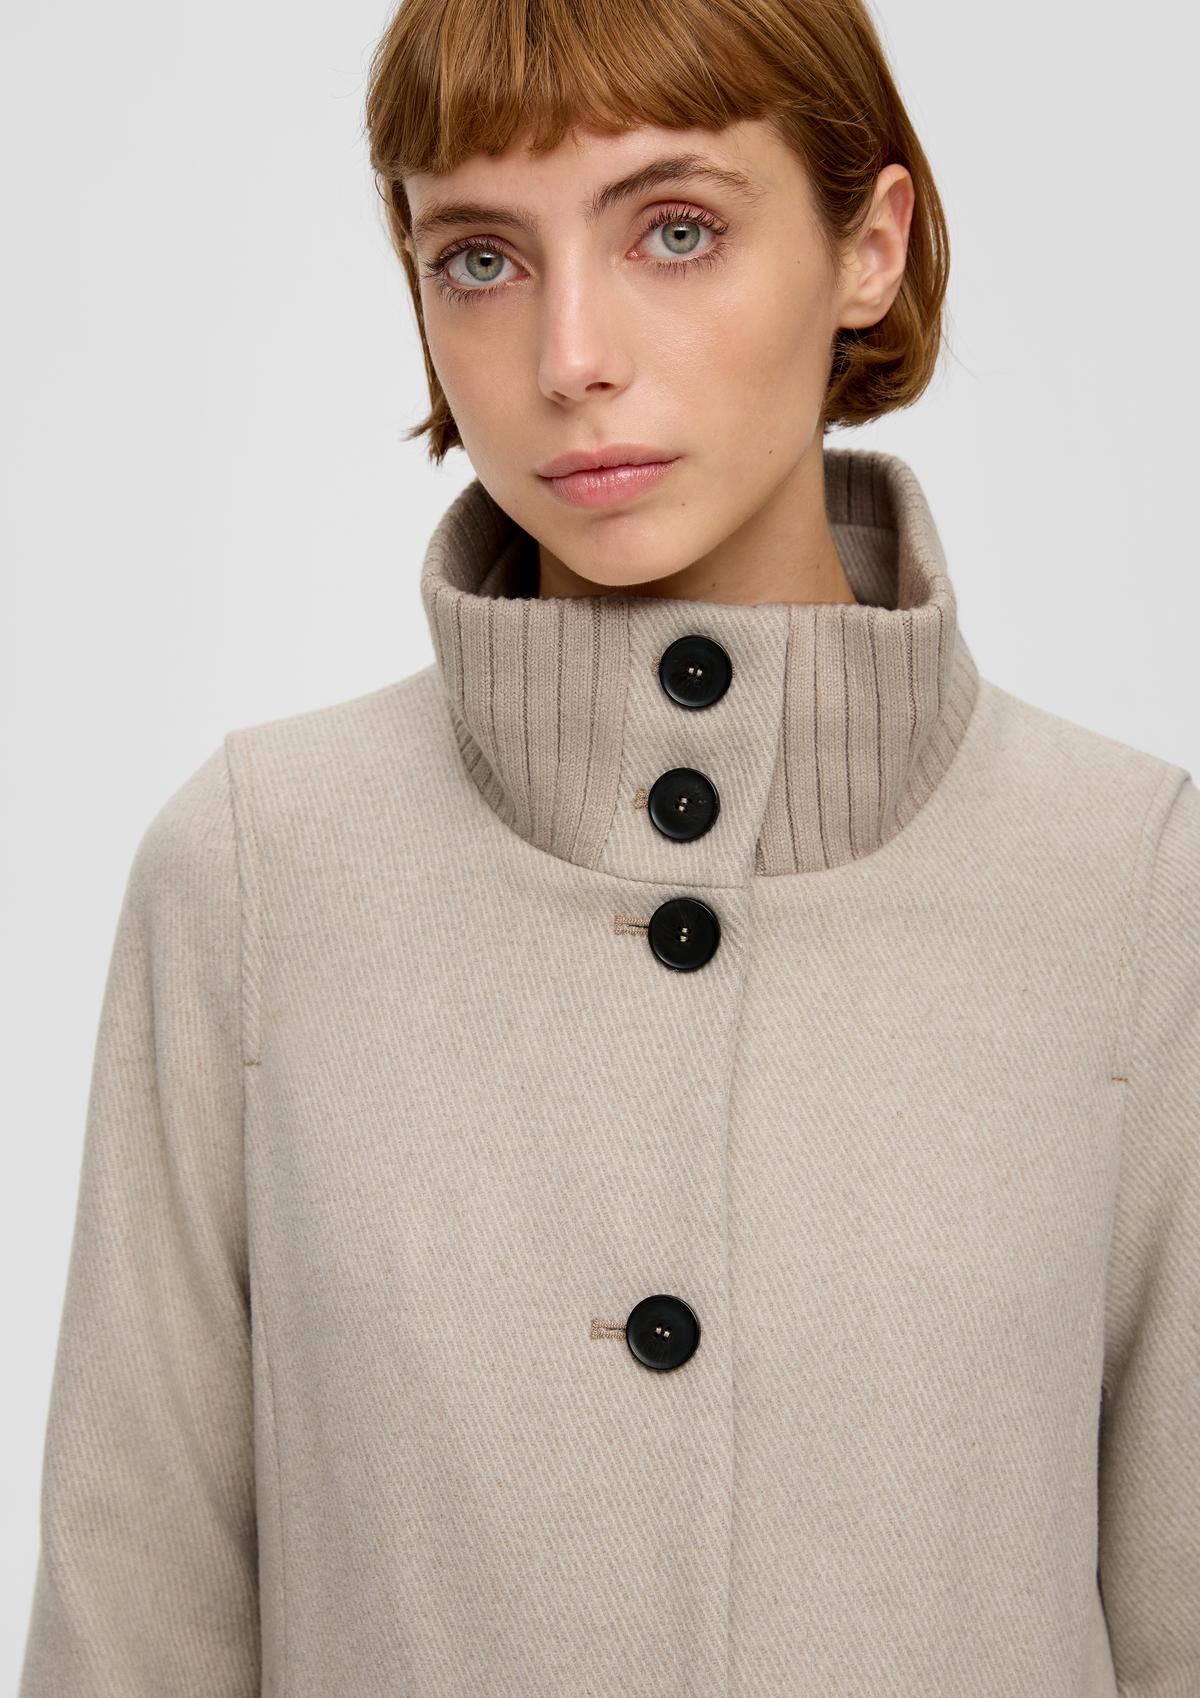 s.Oliver Jacket with a rib knit stand-up collar